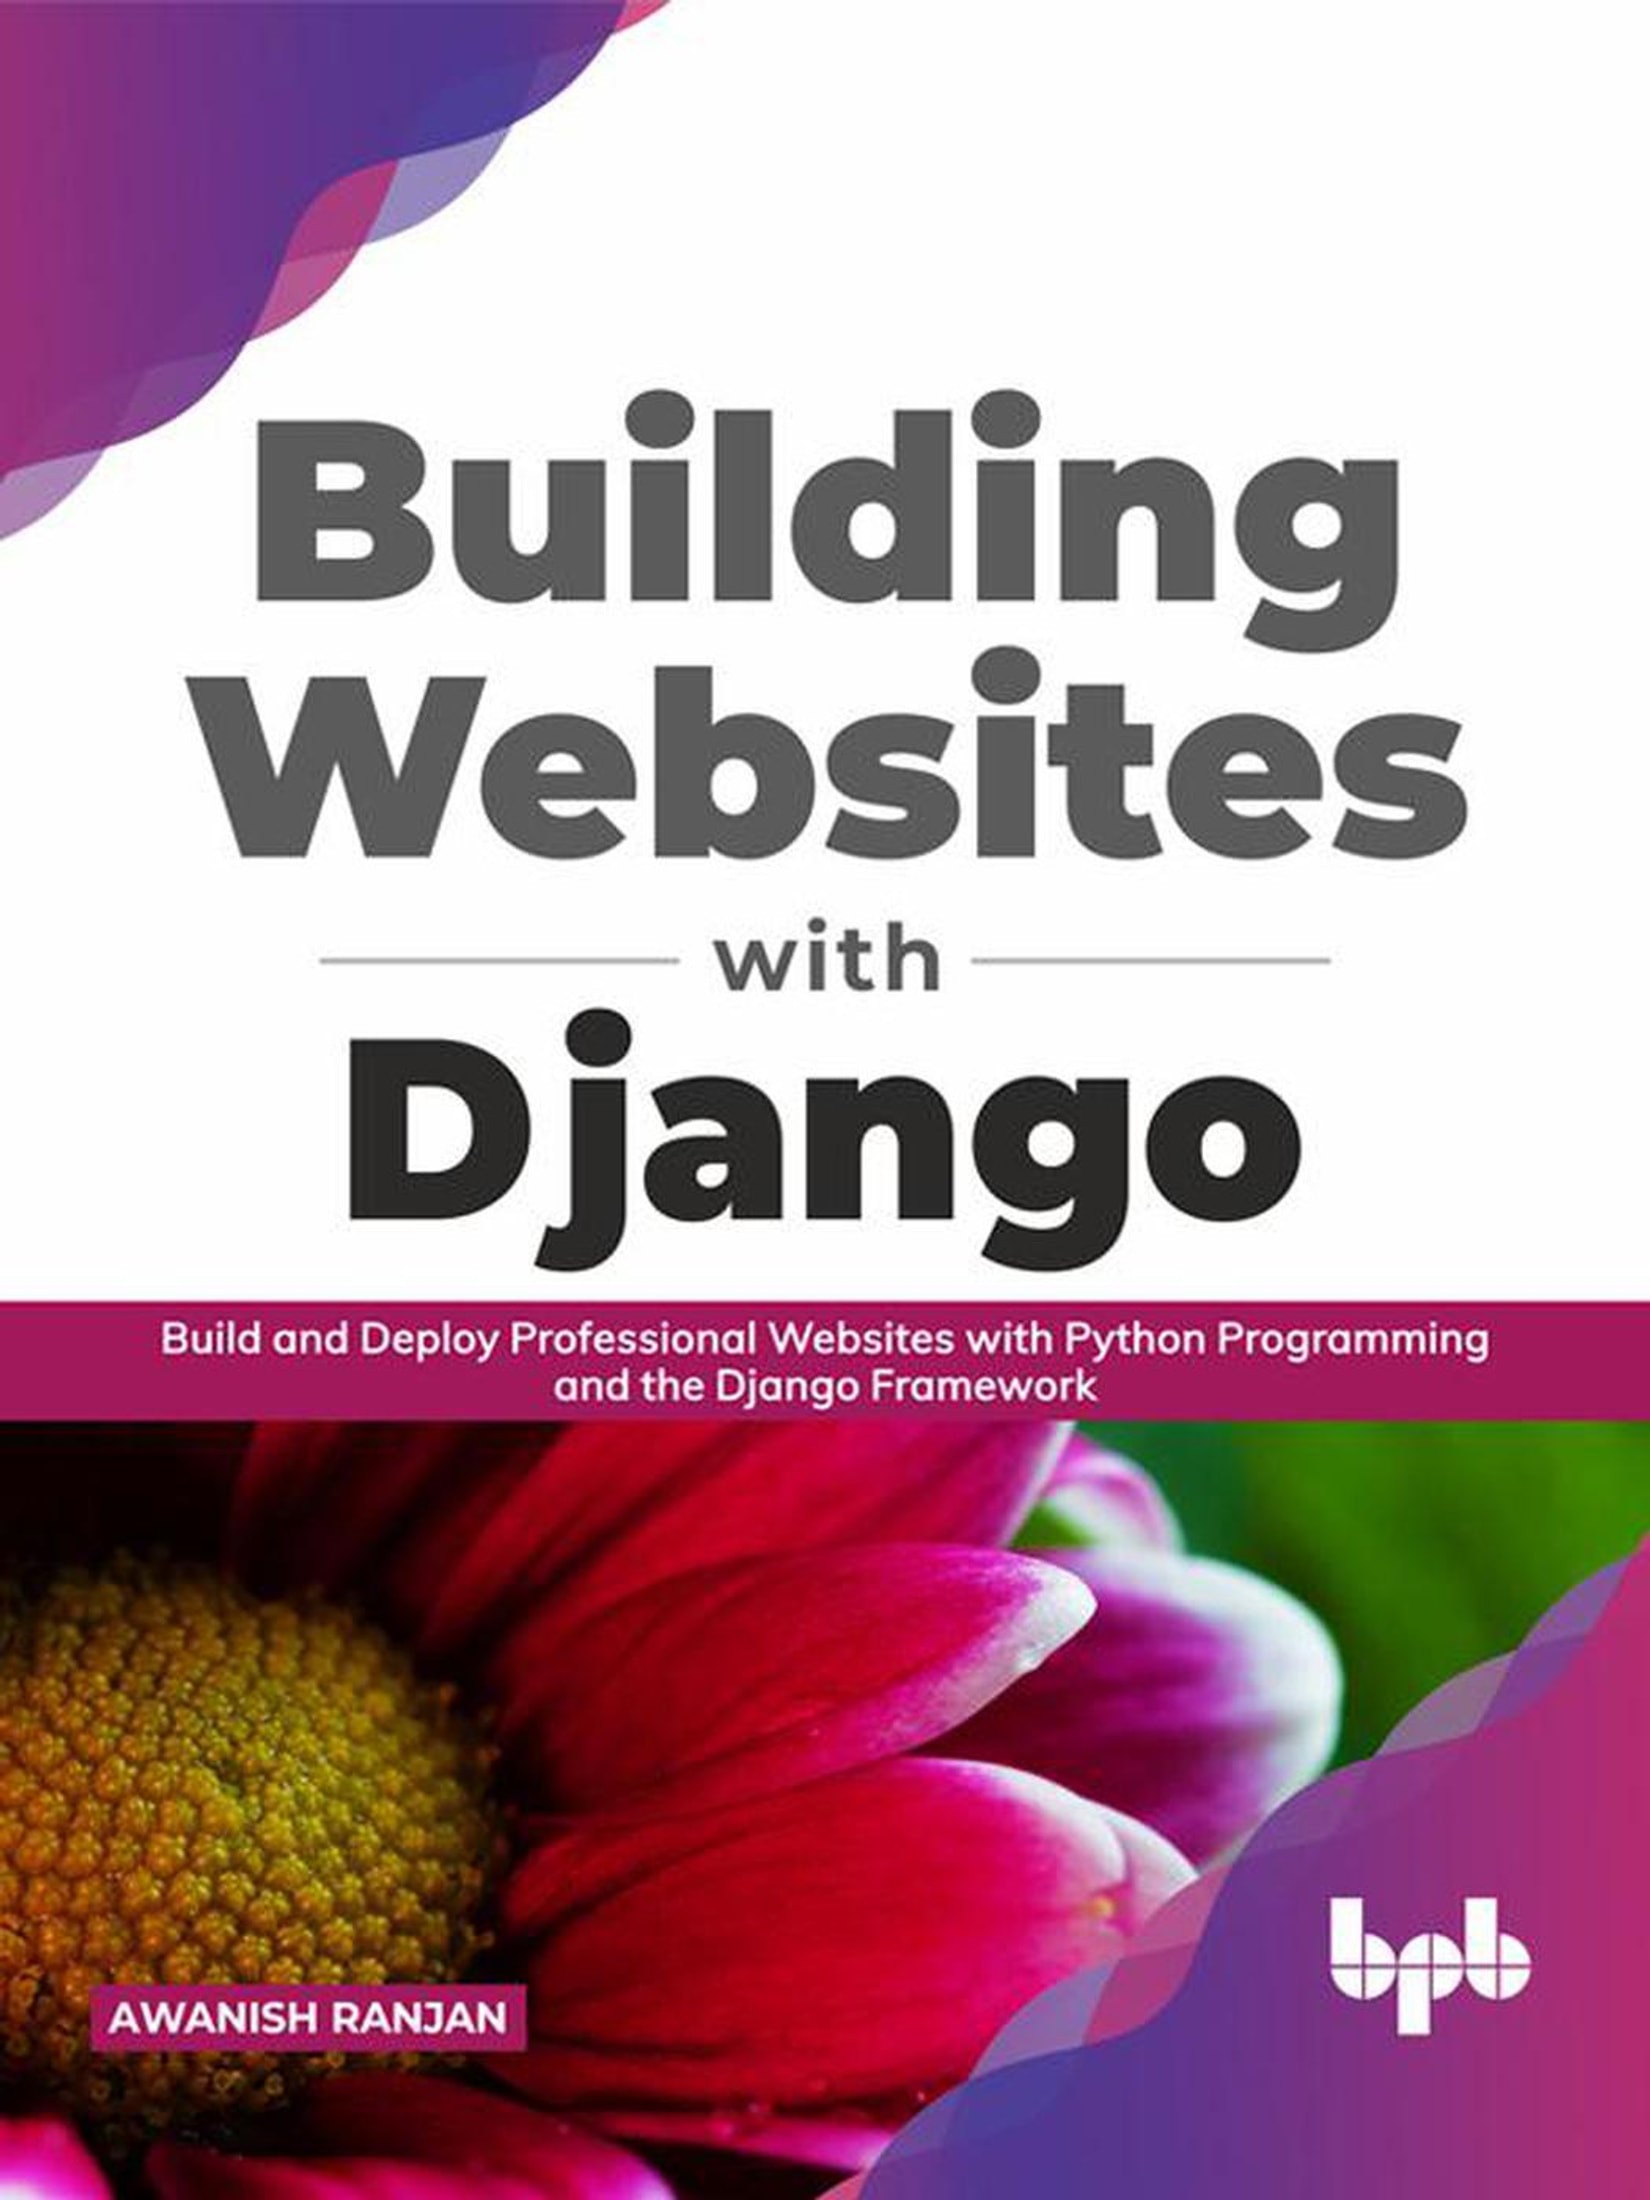 Building Websites with Django: Build and Deploy Professional Websites with Python Programming and the Django Framework (English Edition)